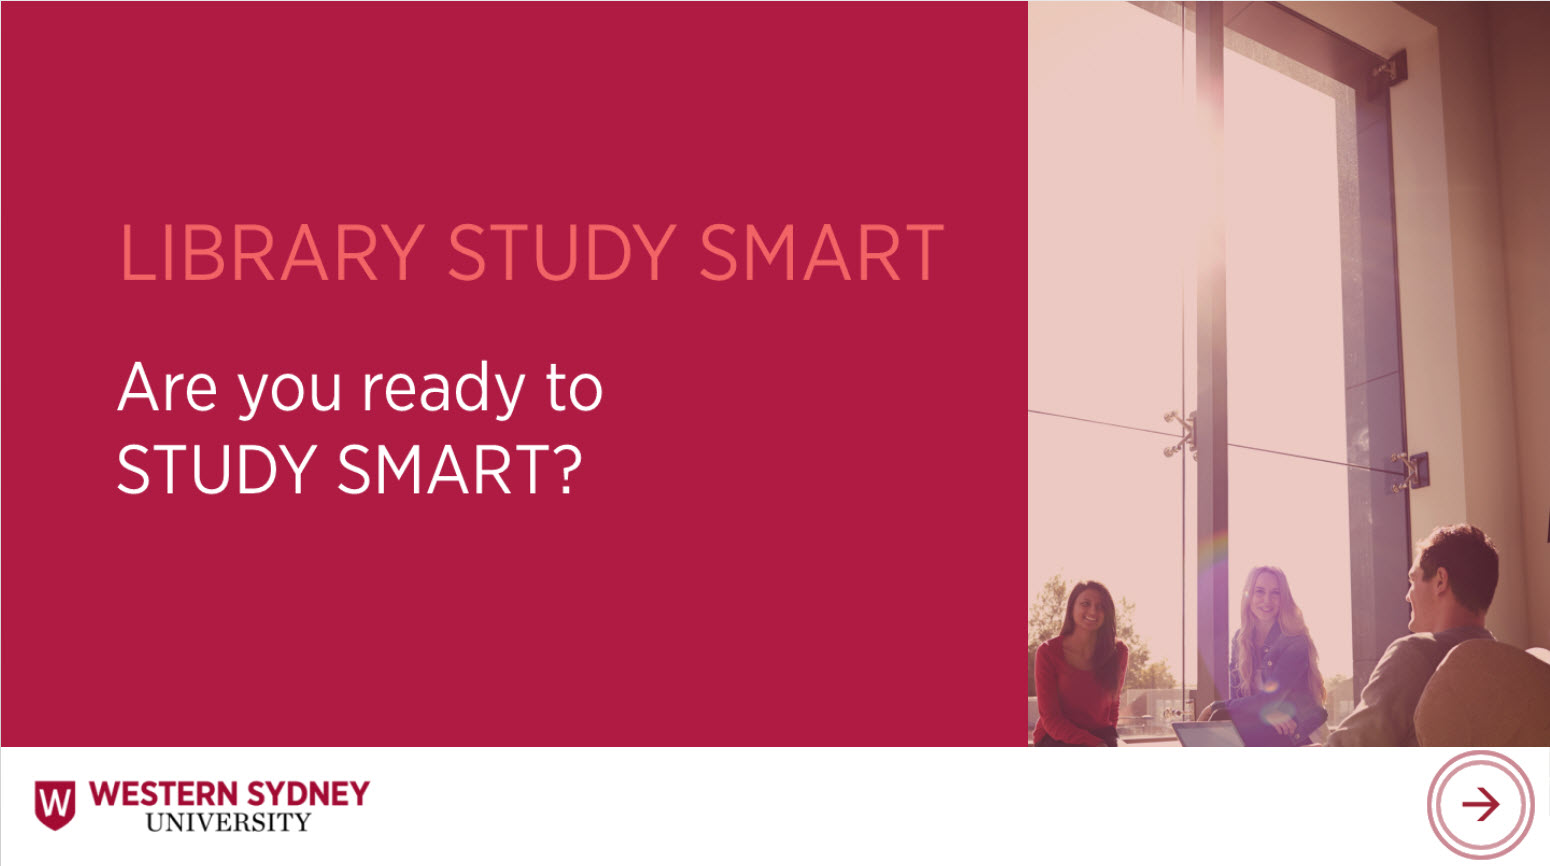 Are you ready to study smart?